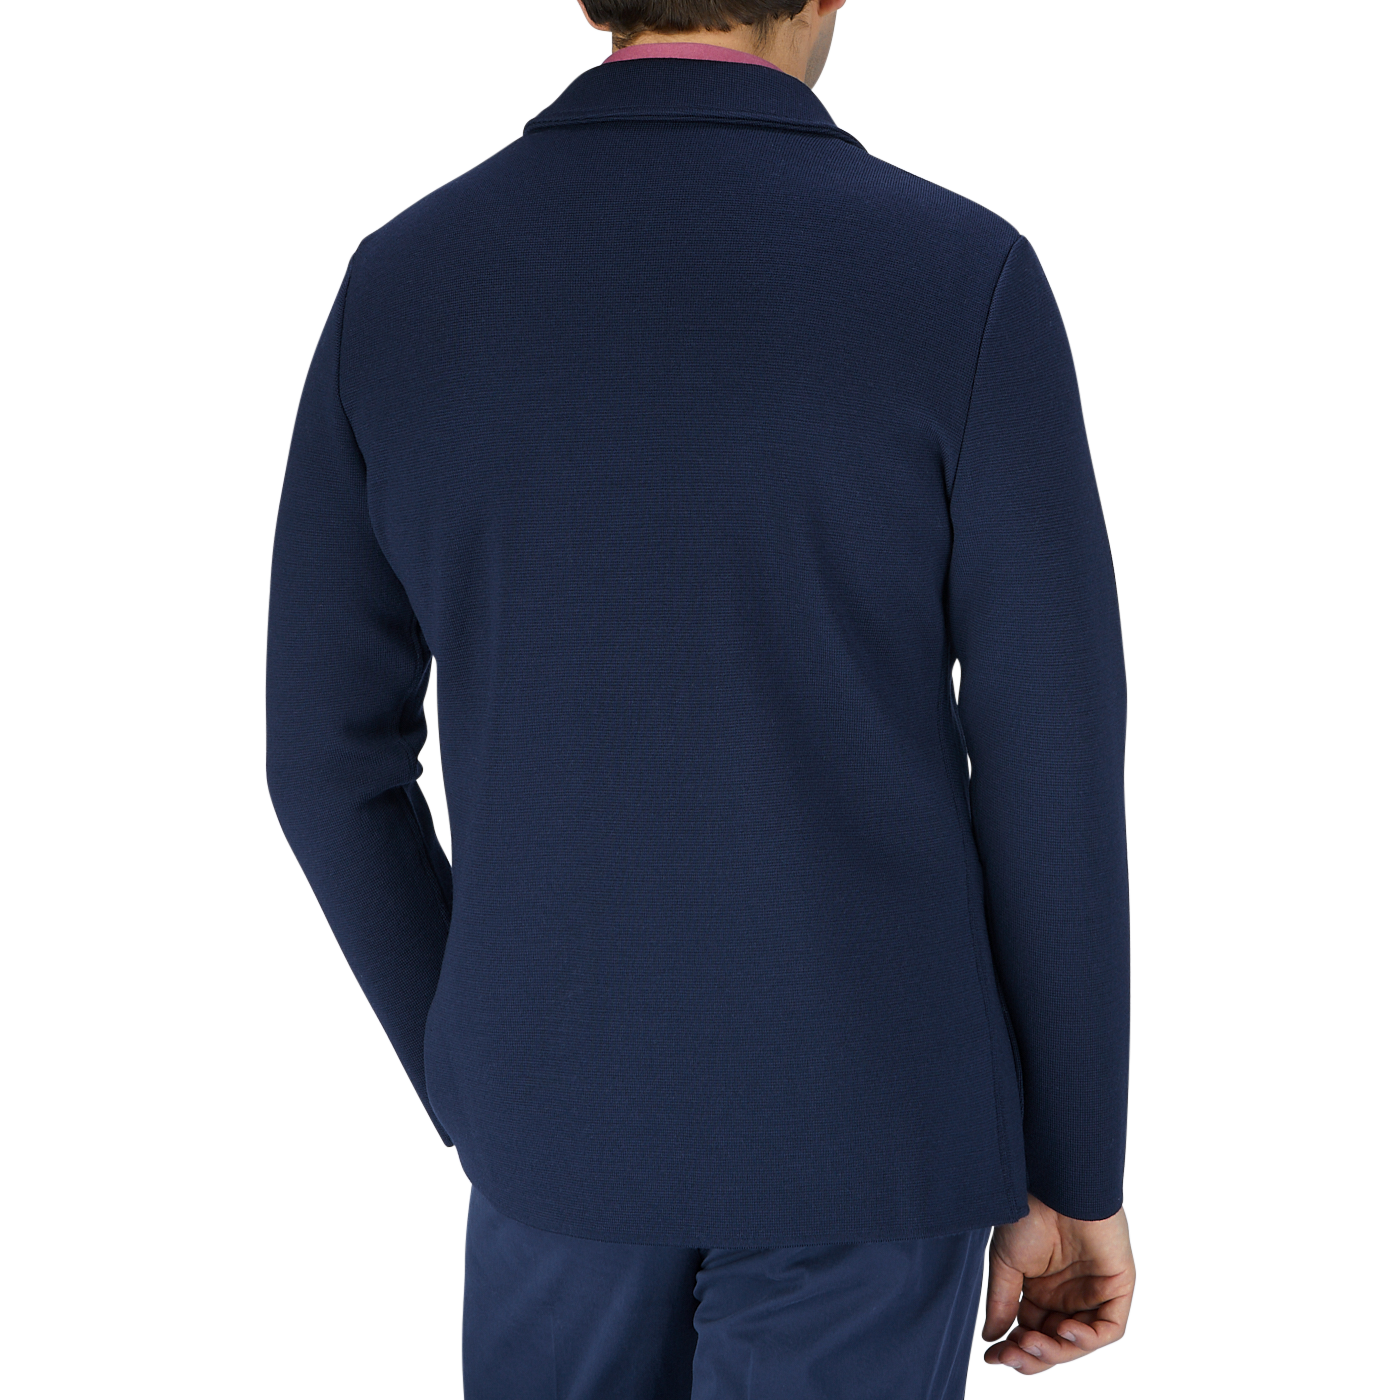 The back view of a man wearing a Maurizio Baldassari Navy Blue Merino Wool Milano Stitch Swacket and pants crafted from merino wool.